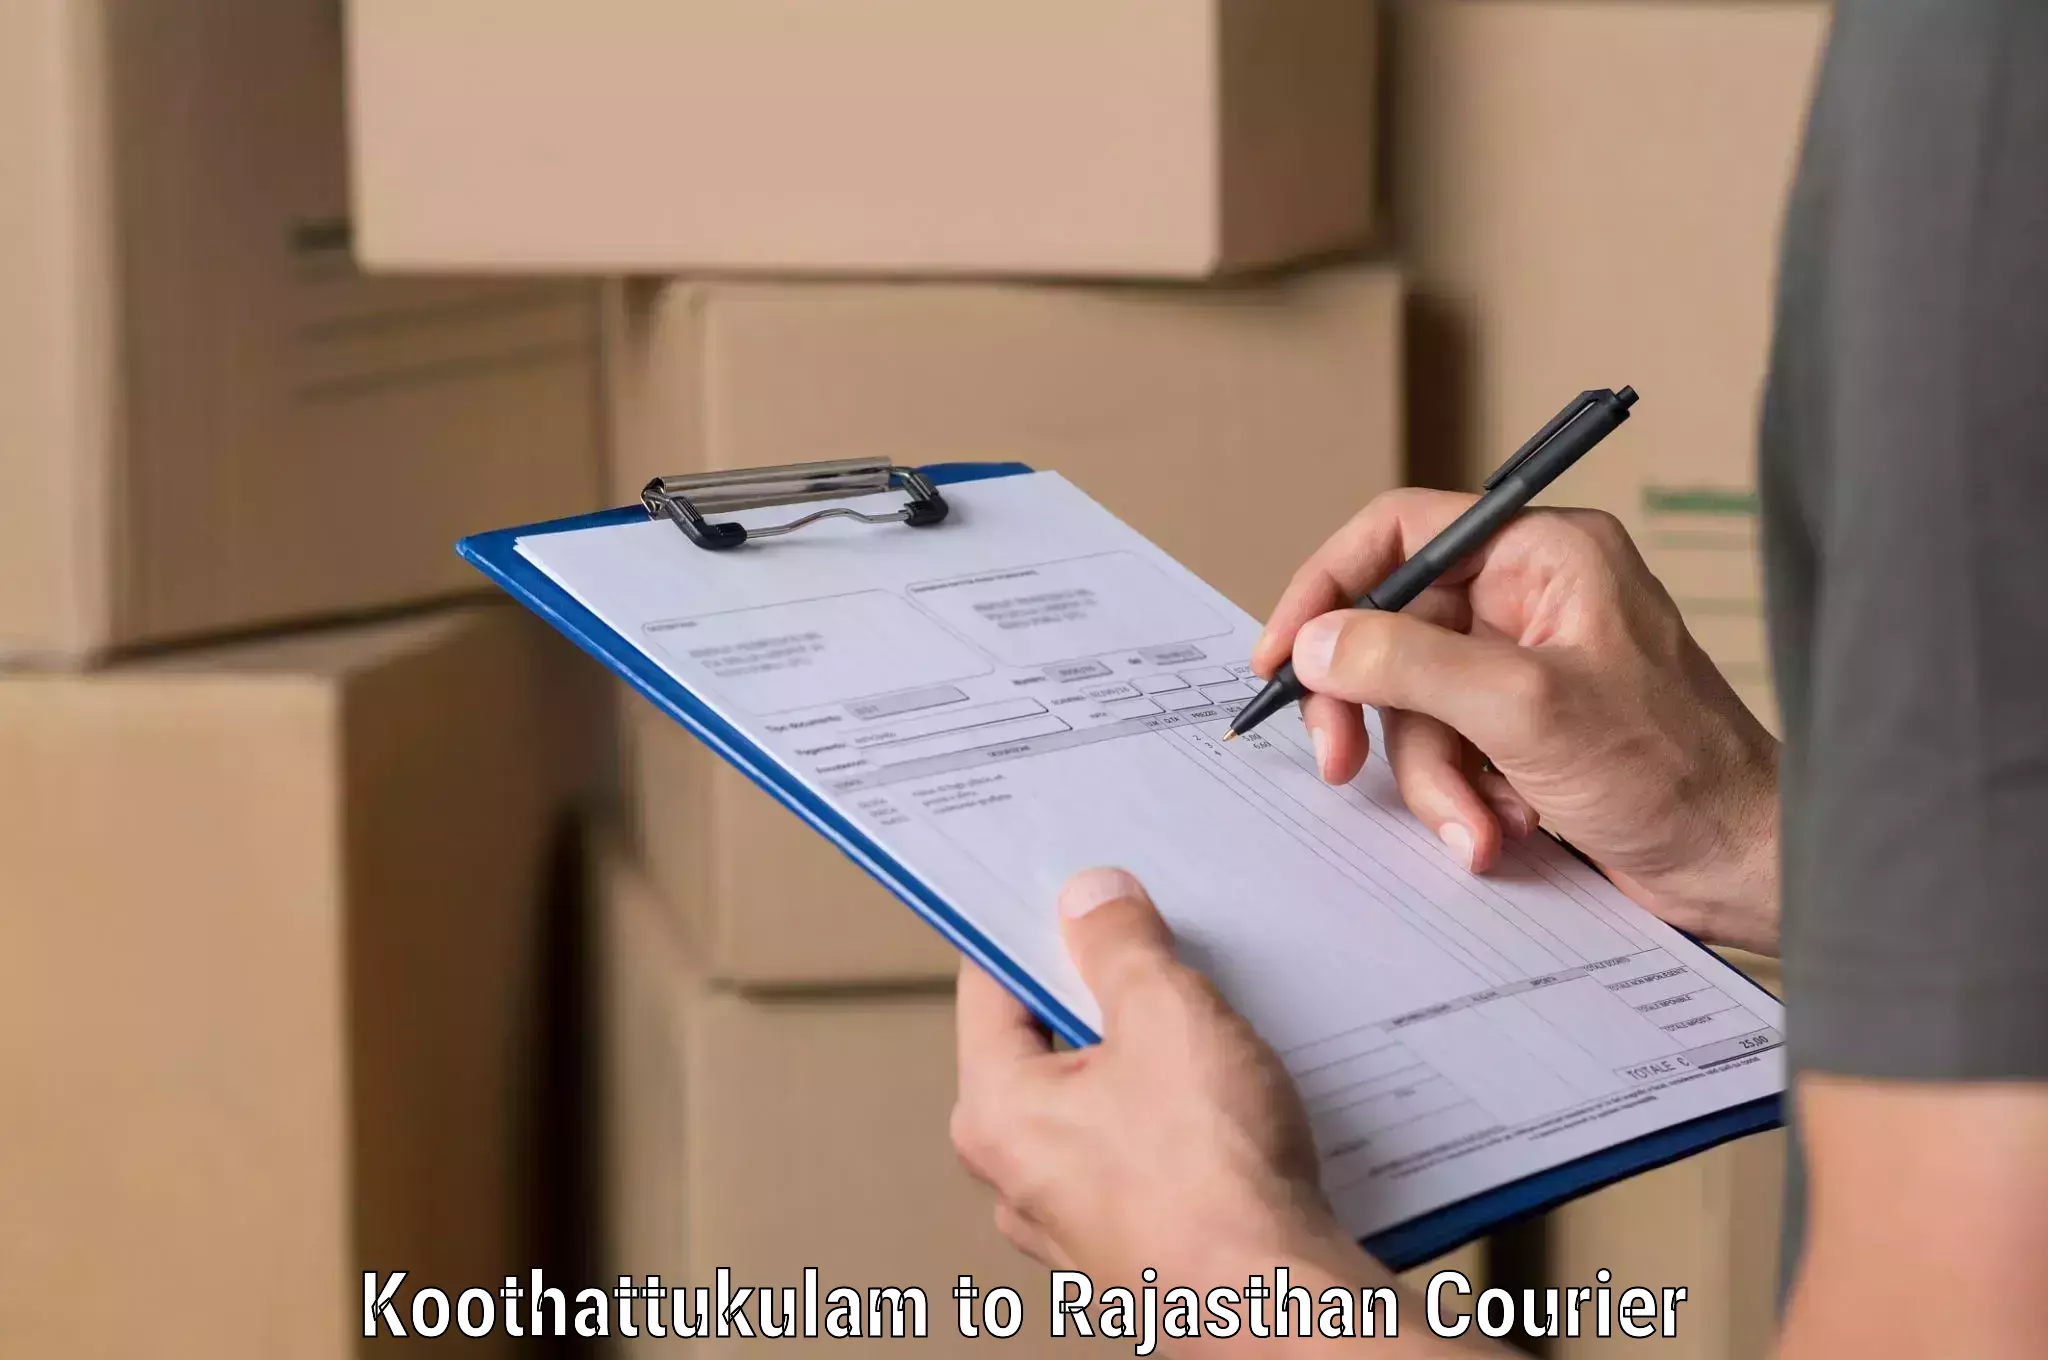 End-to-end delivery Koothattukulam to Rajasthan